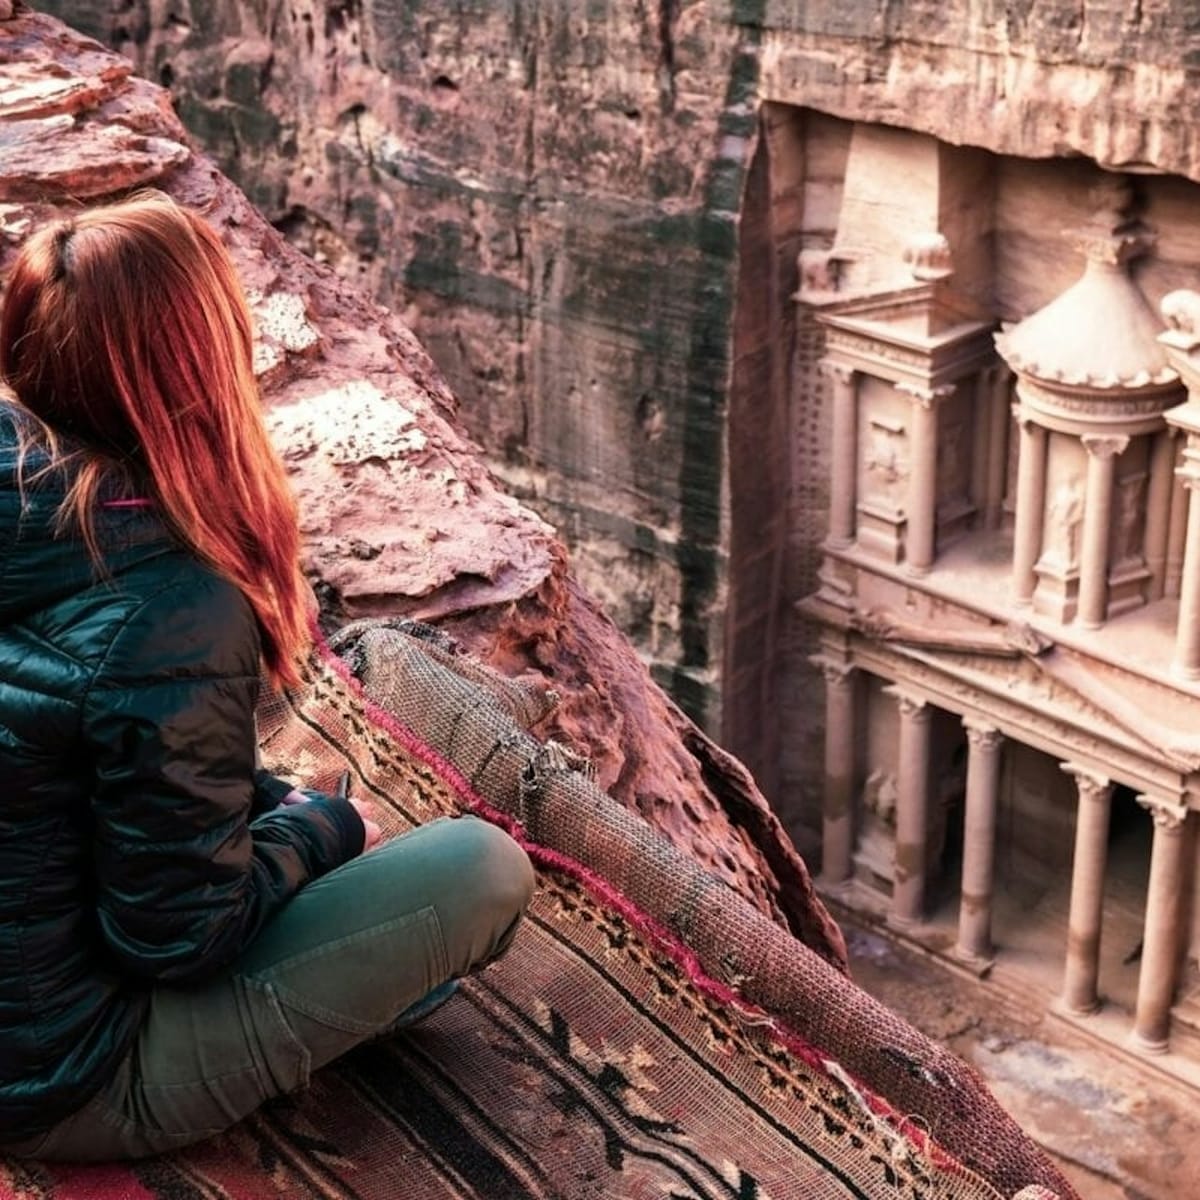 little-petra-and-petra-full-day-trip-from-amman_1